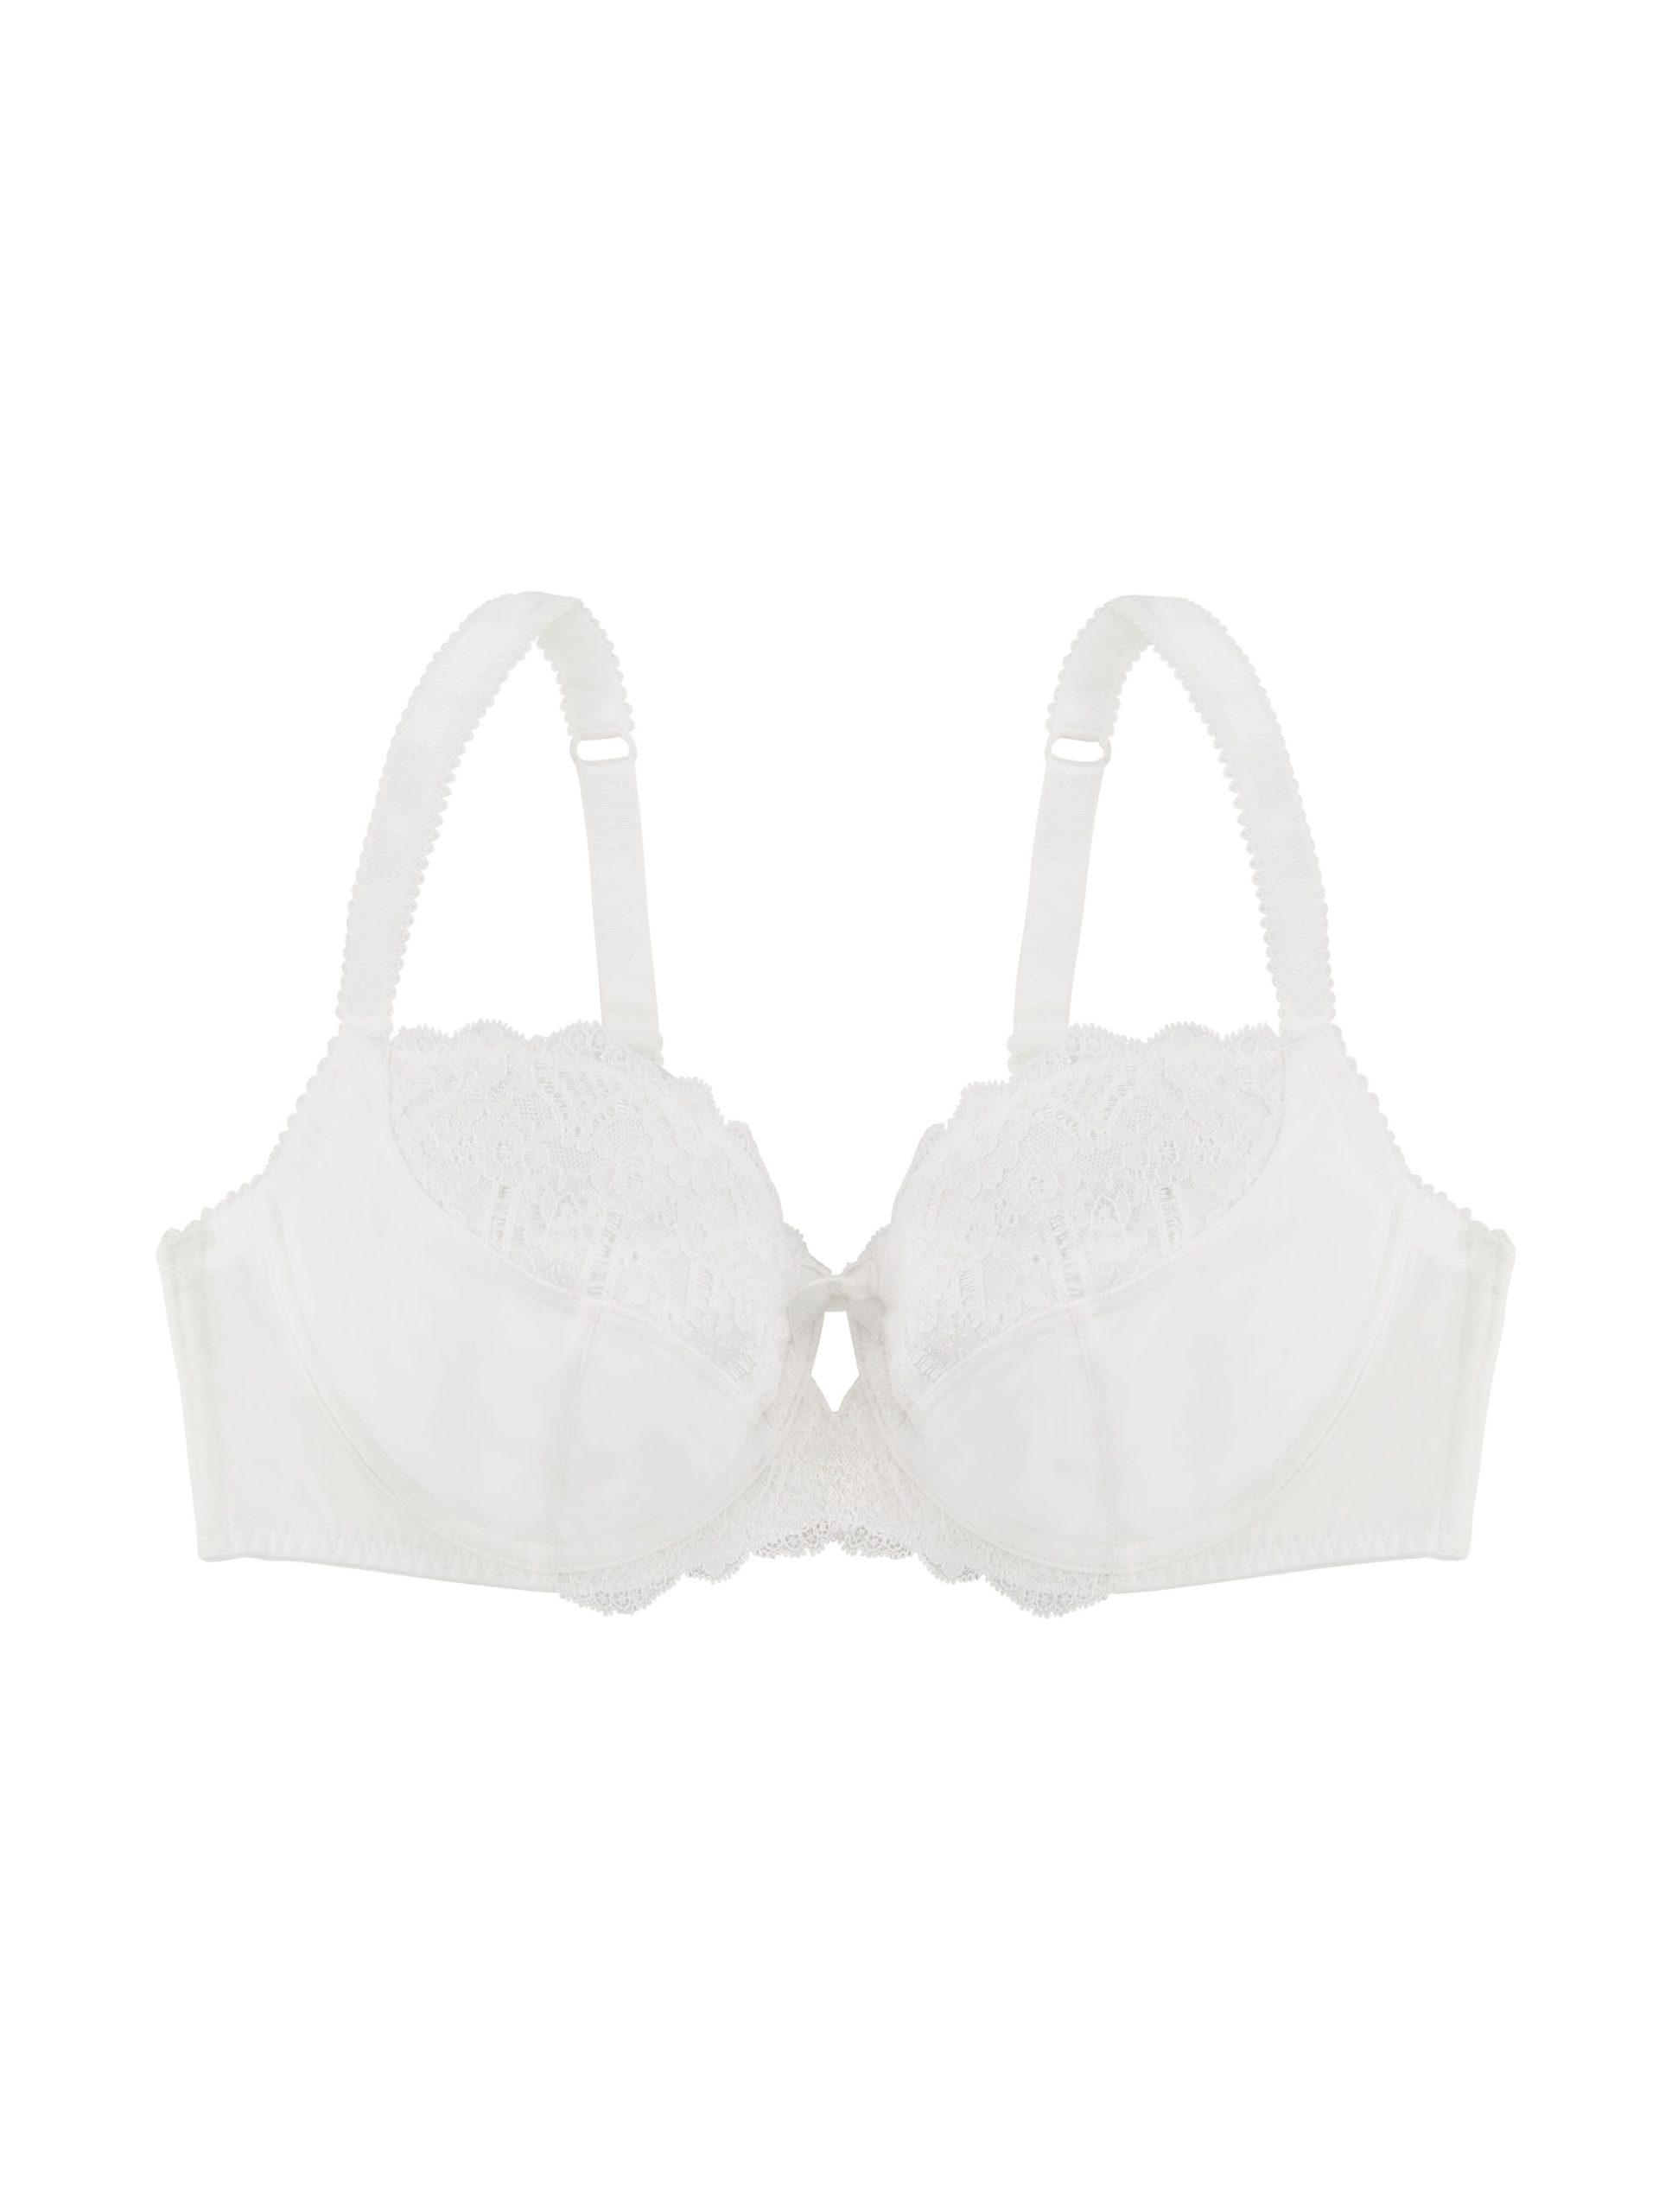 Women's Padded, Non-Wired, Multiway, T-Shirt Bra (BR094-WHITE